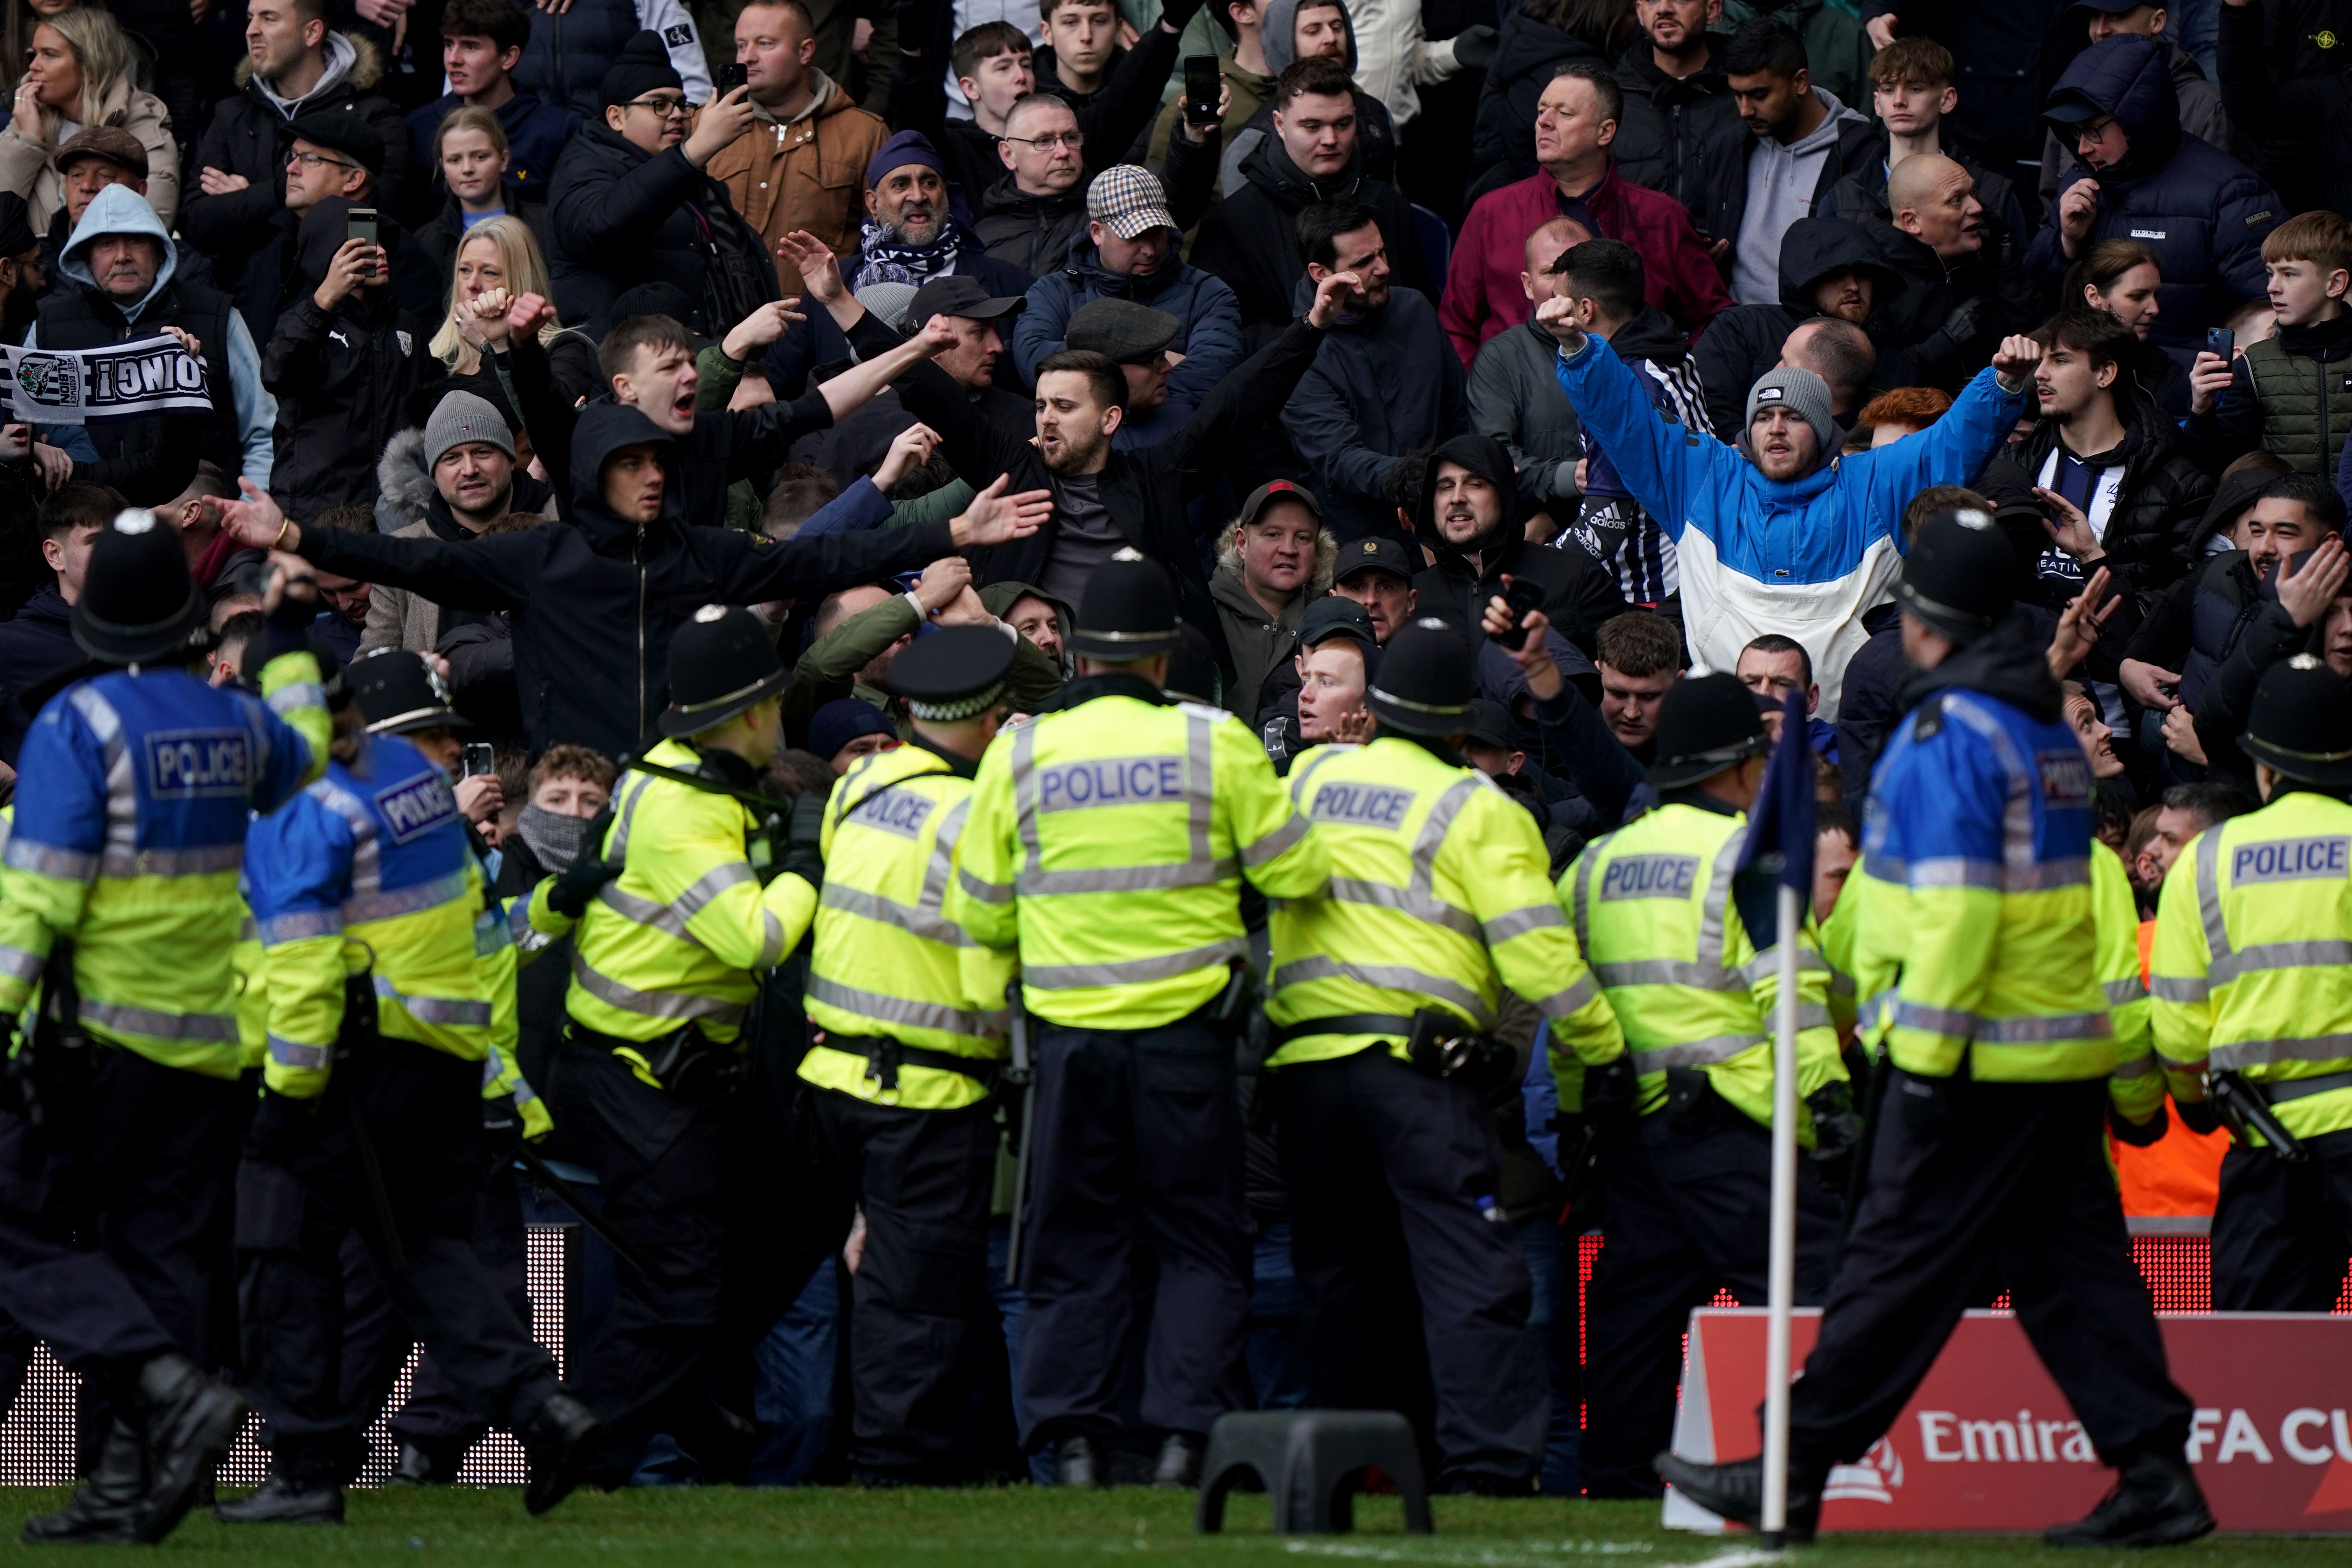 West Brom could face sanctions after crowd trouble mars Black